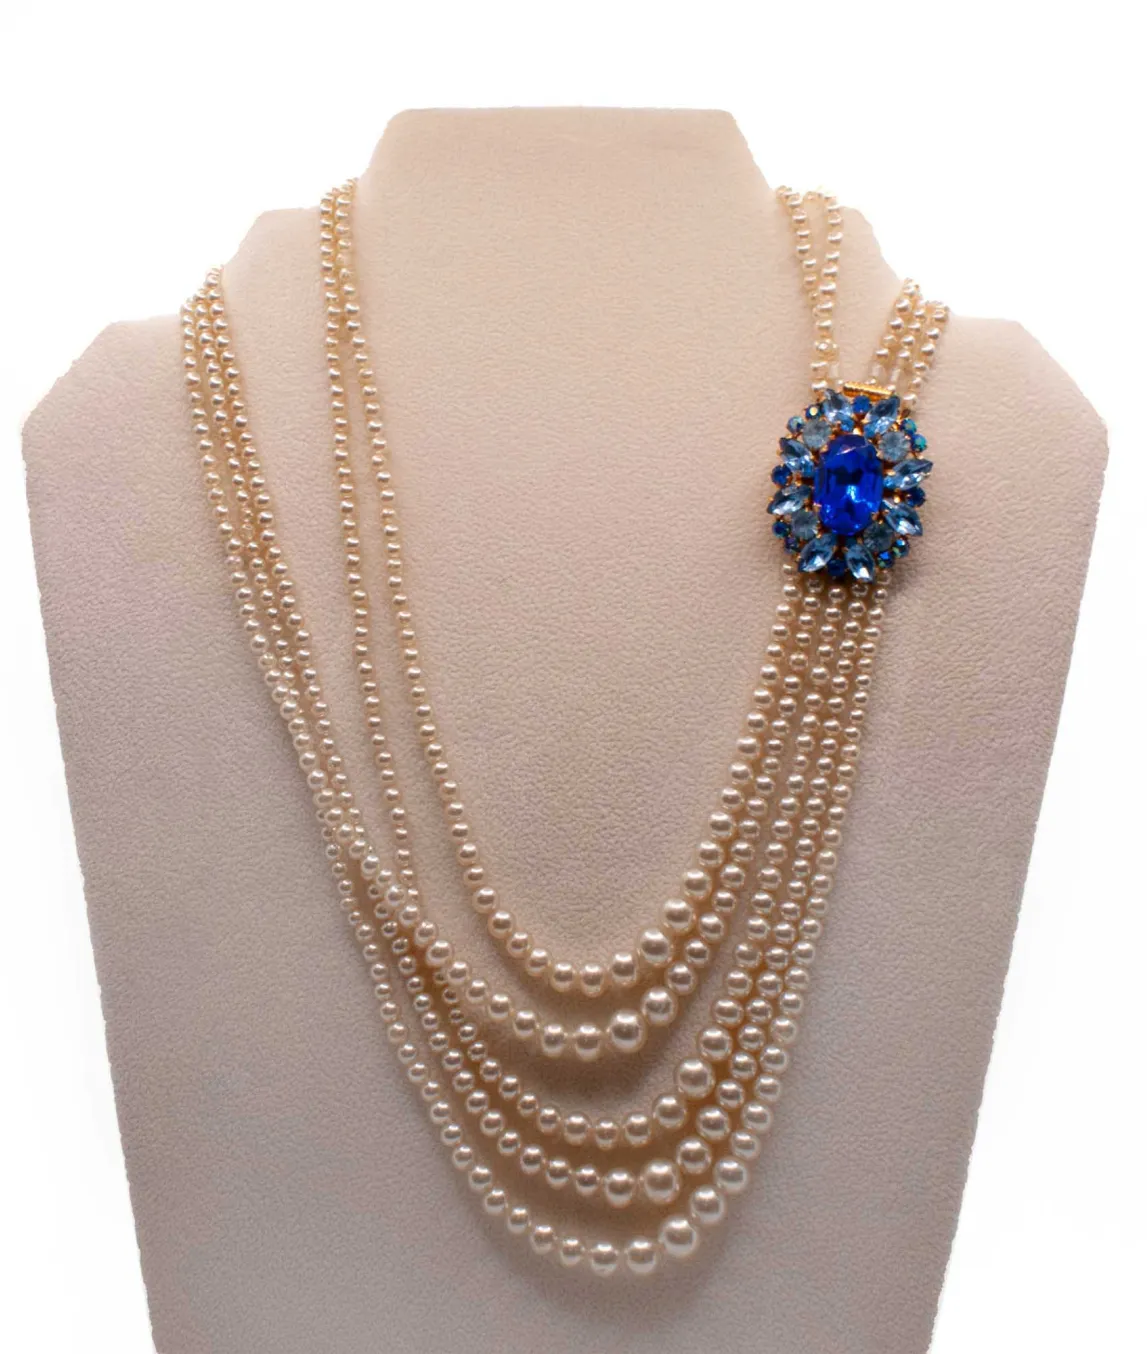 Multi-strand Faux Pearl Necklace with Decorative Blue Clasp